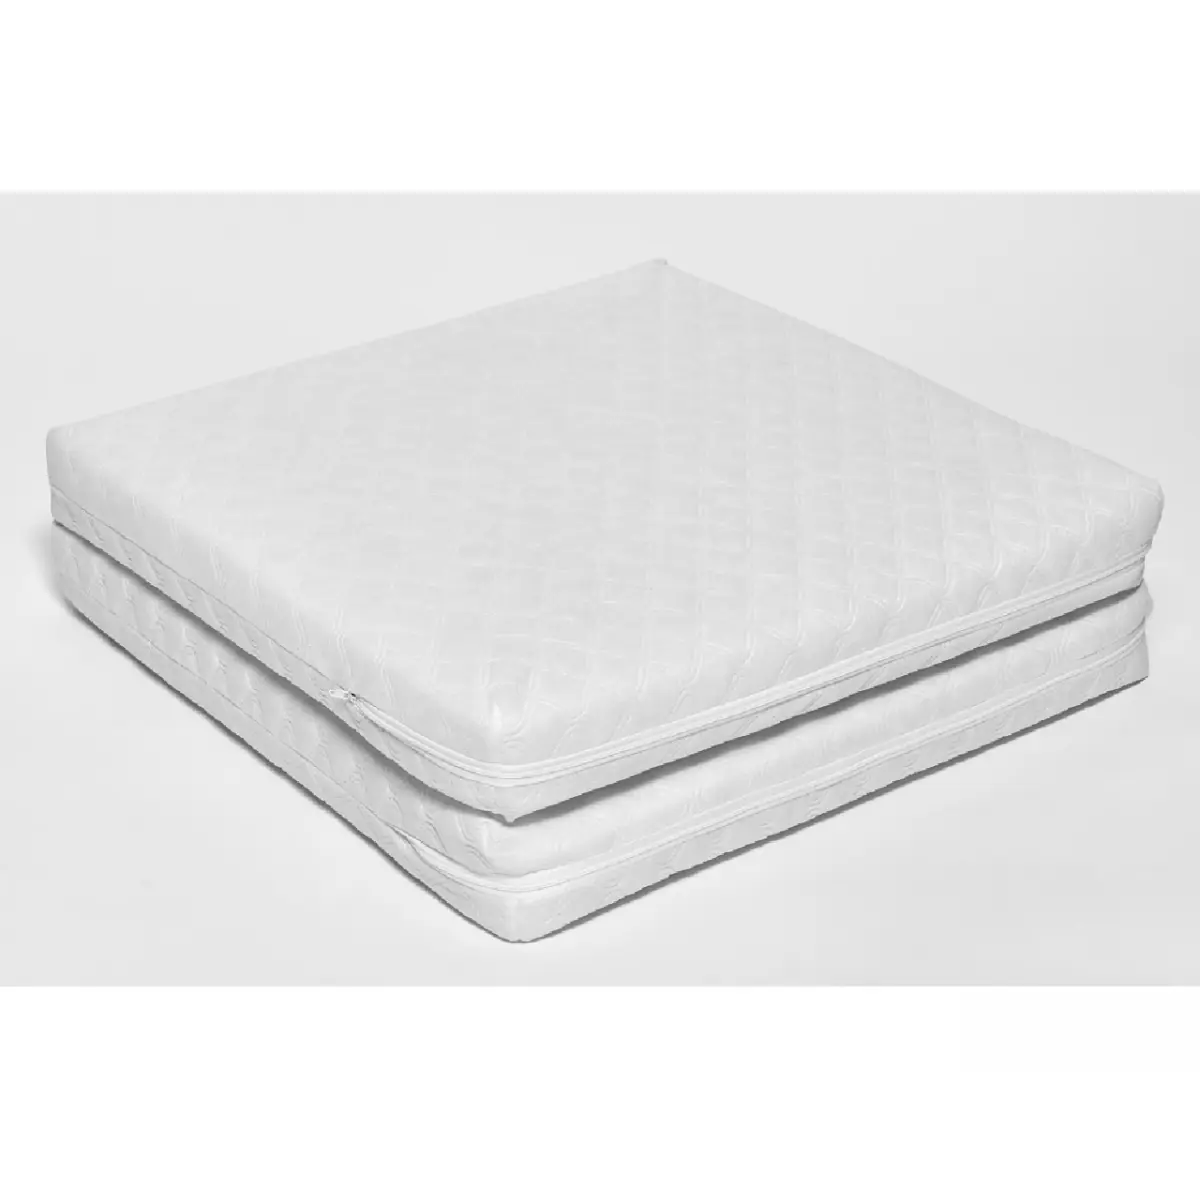 Image of Ventalux Non Allergenic Fibre Quilt Covered Folding Travel Cot Mattress-White (119x59)